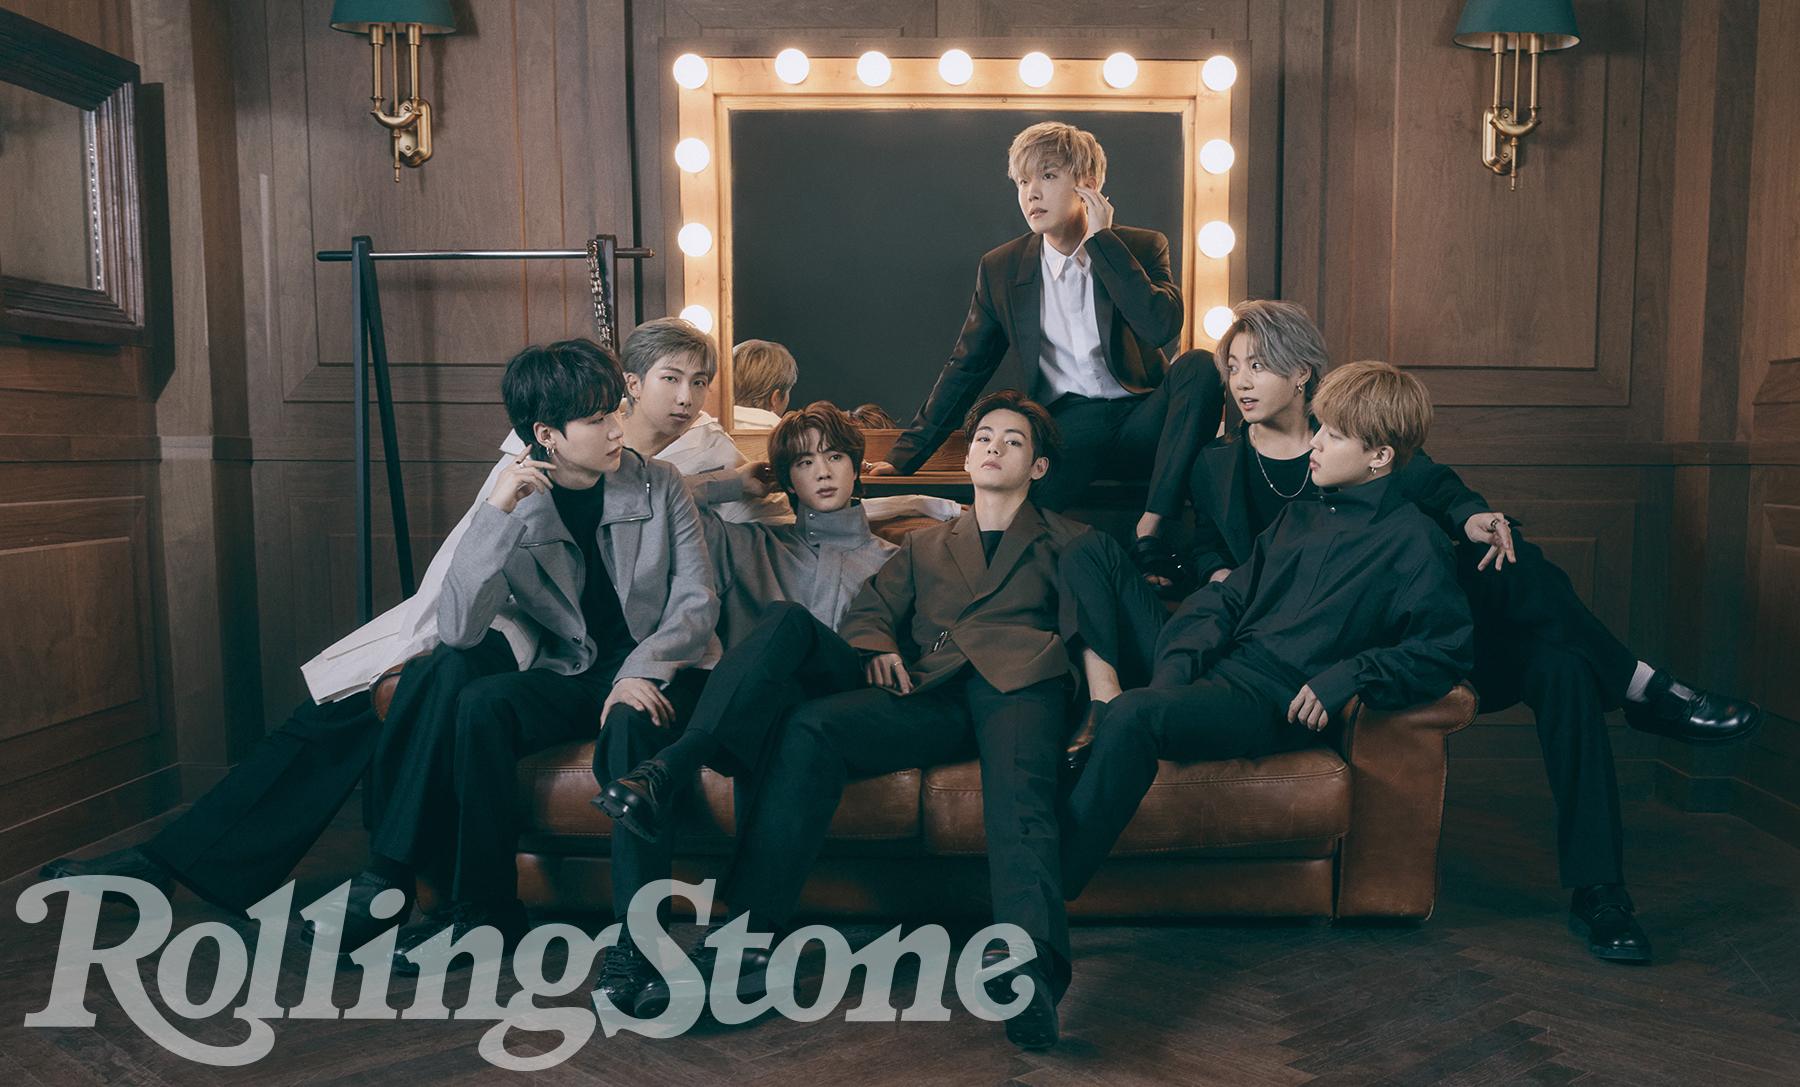 LOOK: BTS makes history as first all-Asian act to make the cover of Rolling Stone